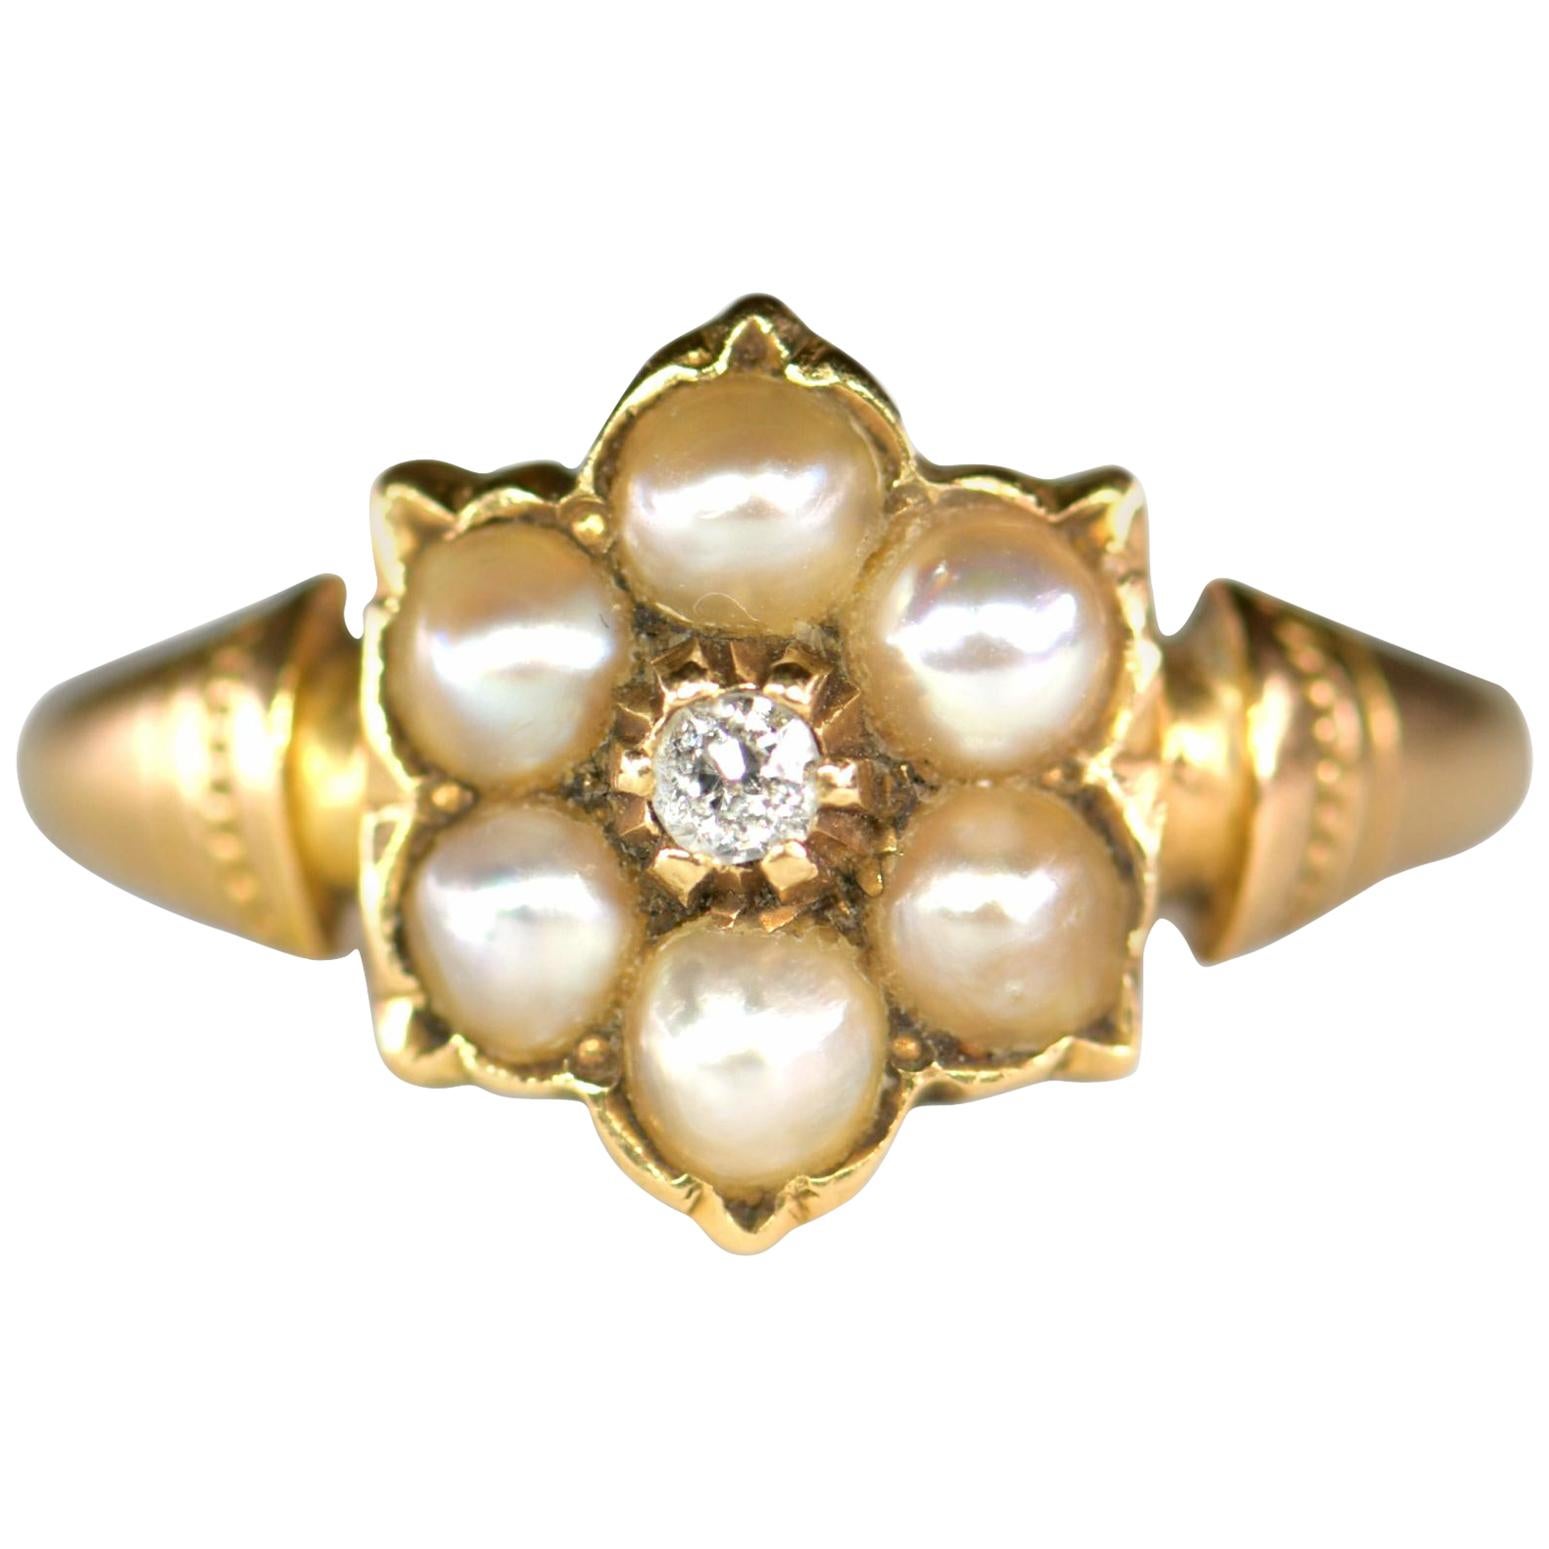 Antique Pearl and Diamond, 18k Yellow Gold Dress Ring | eBay